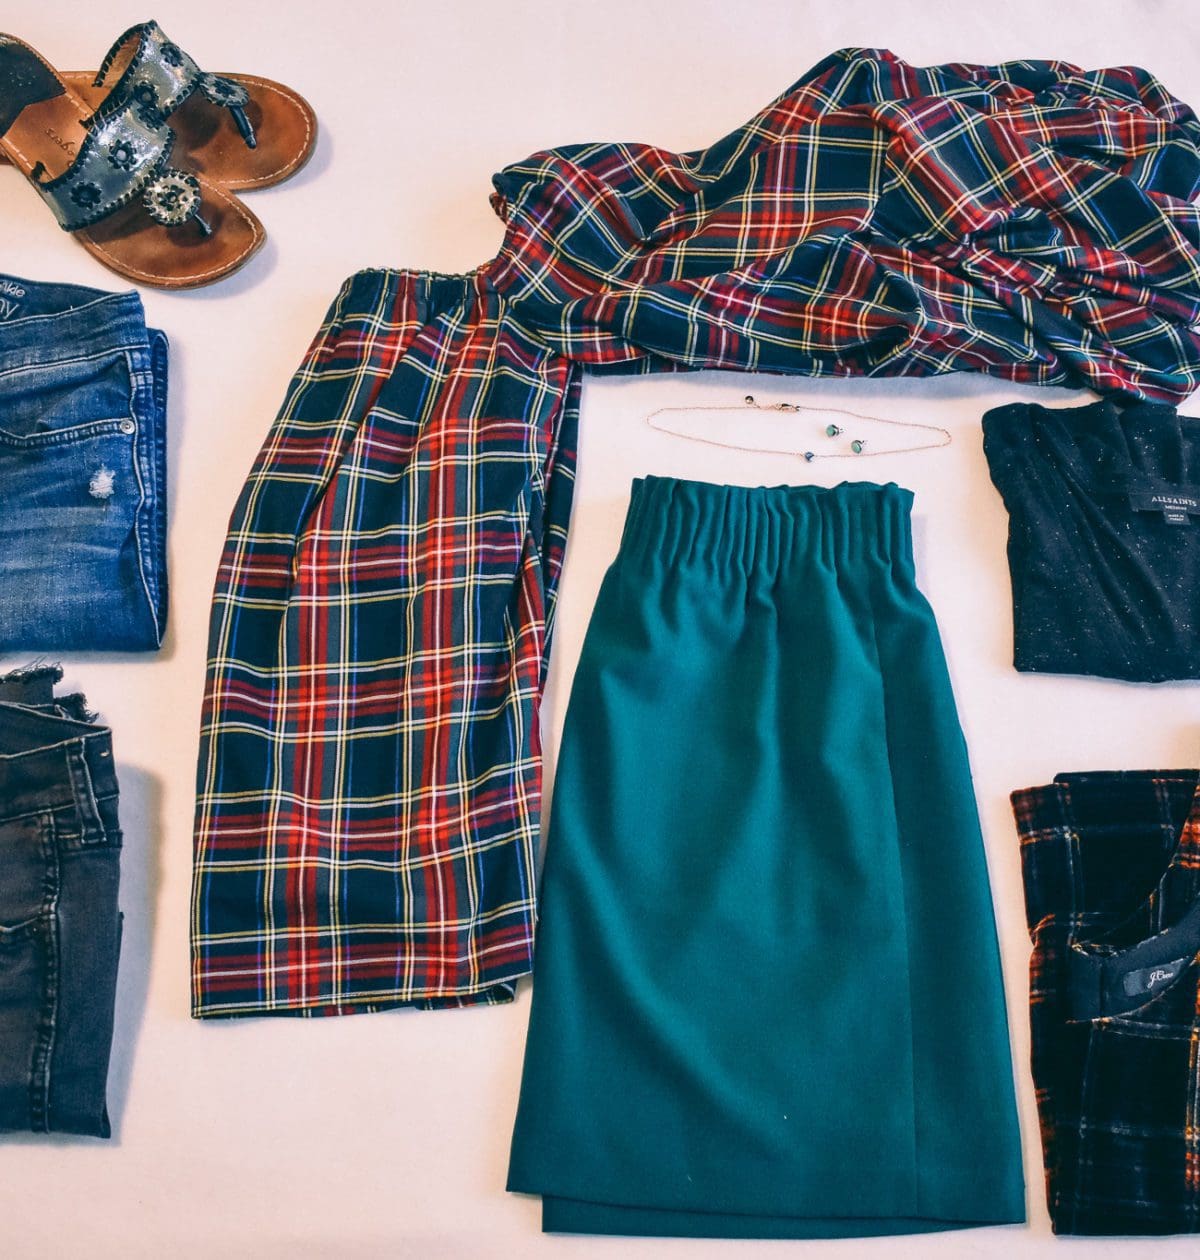 I've been starting to figure out what I need to pack for the holiday and decided to pull a few Christmas outfit ideas to see what seemed right. As a big tartan lover, I probably will use it as an excuse to wear as much of it as I can. Check out what pieces are standing out to me for the holiday here!